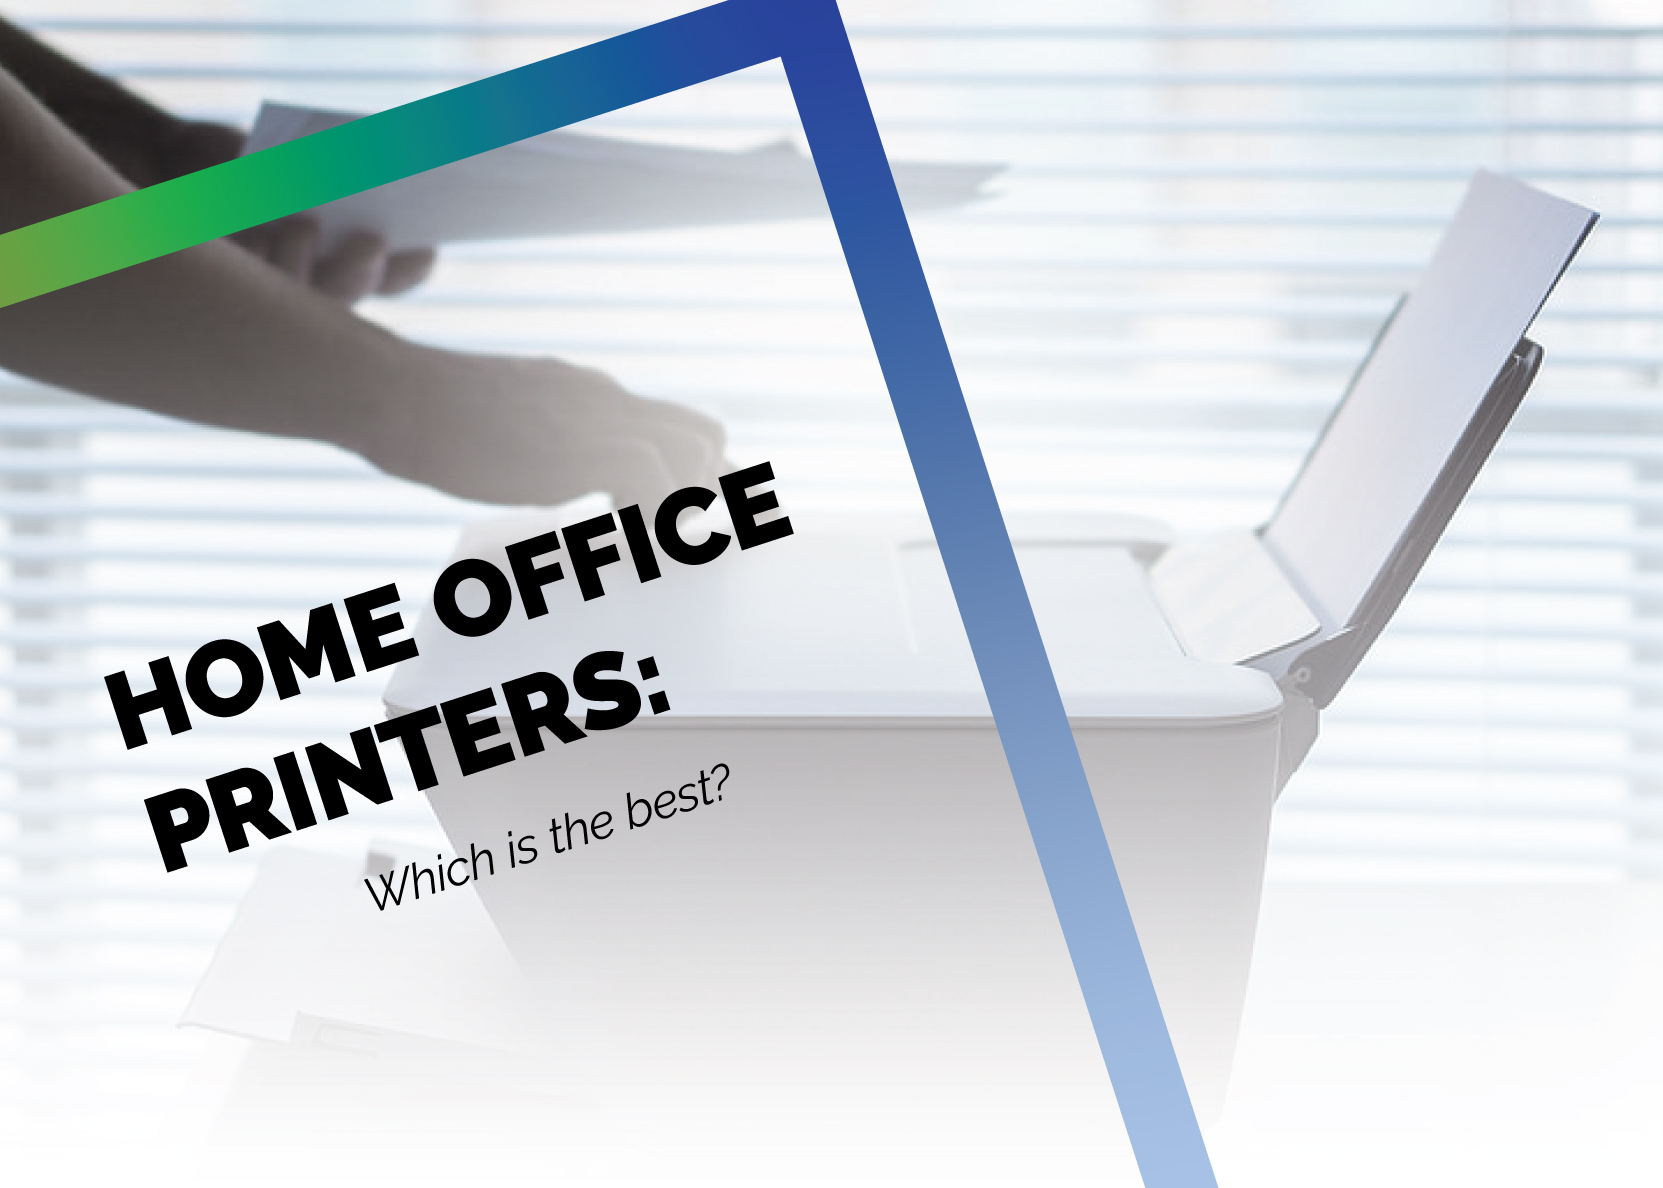 What is the Best Home Office Printer?